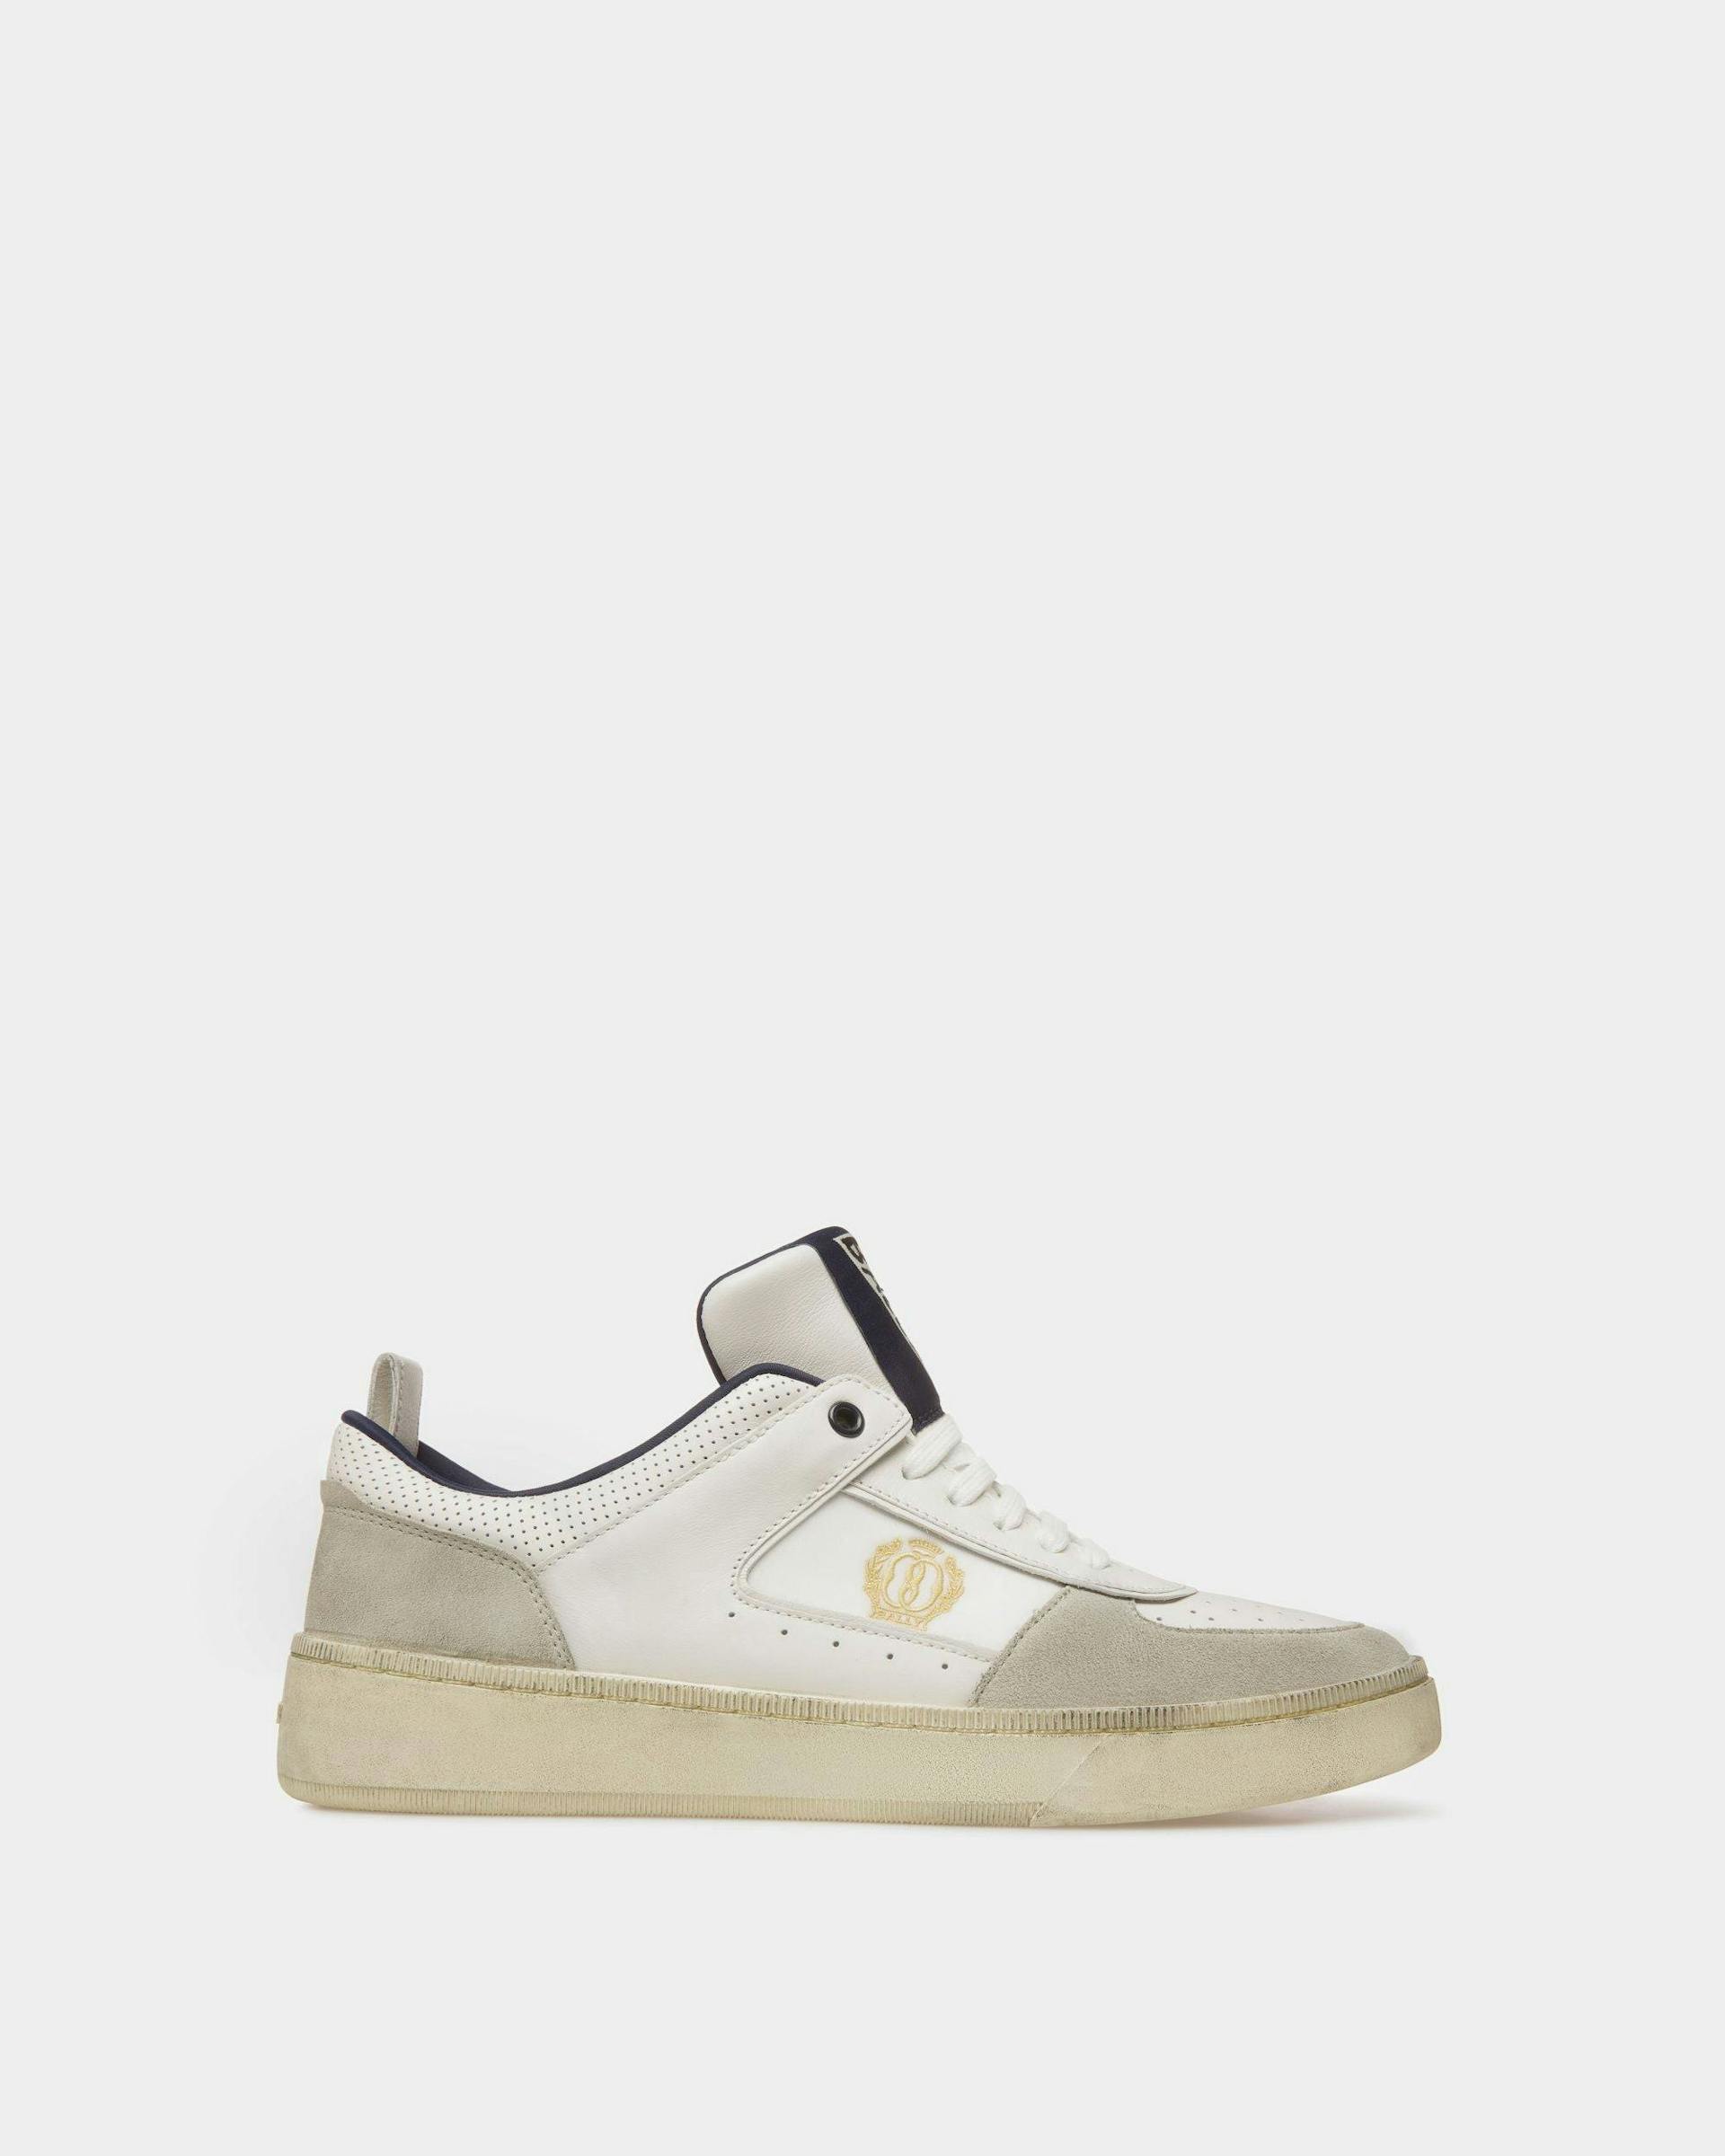 Raise Sneakers In Dusty White And Midnight Leather And Fabric - Men's - Bally - 01